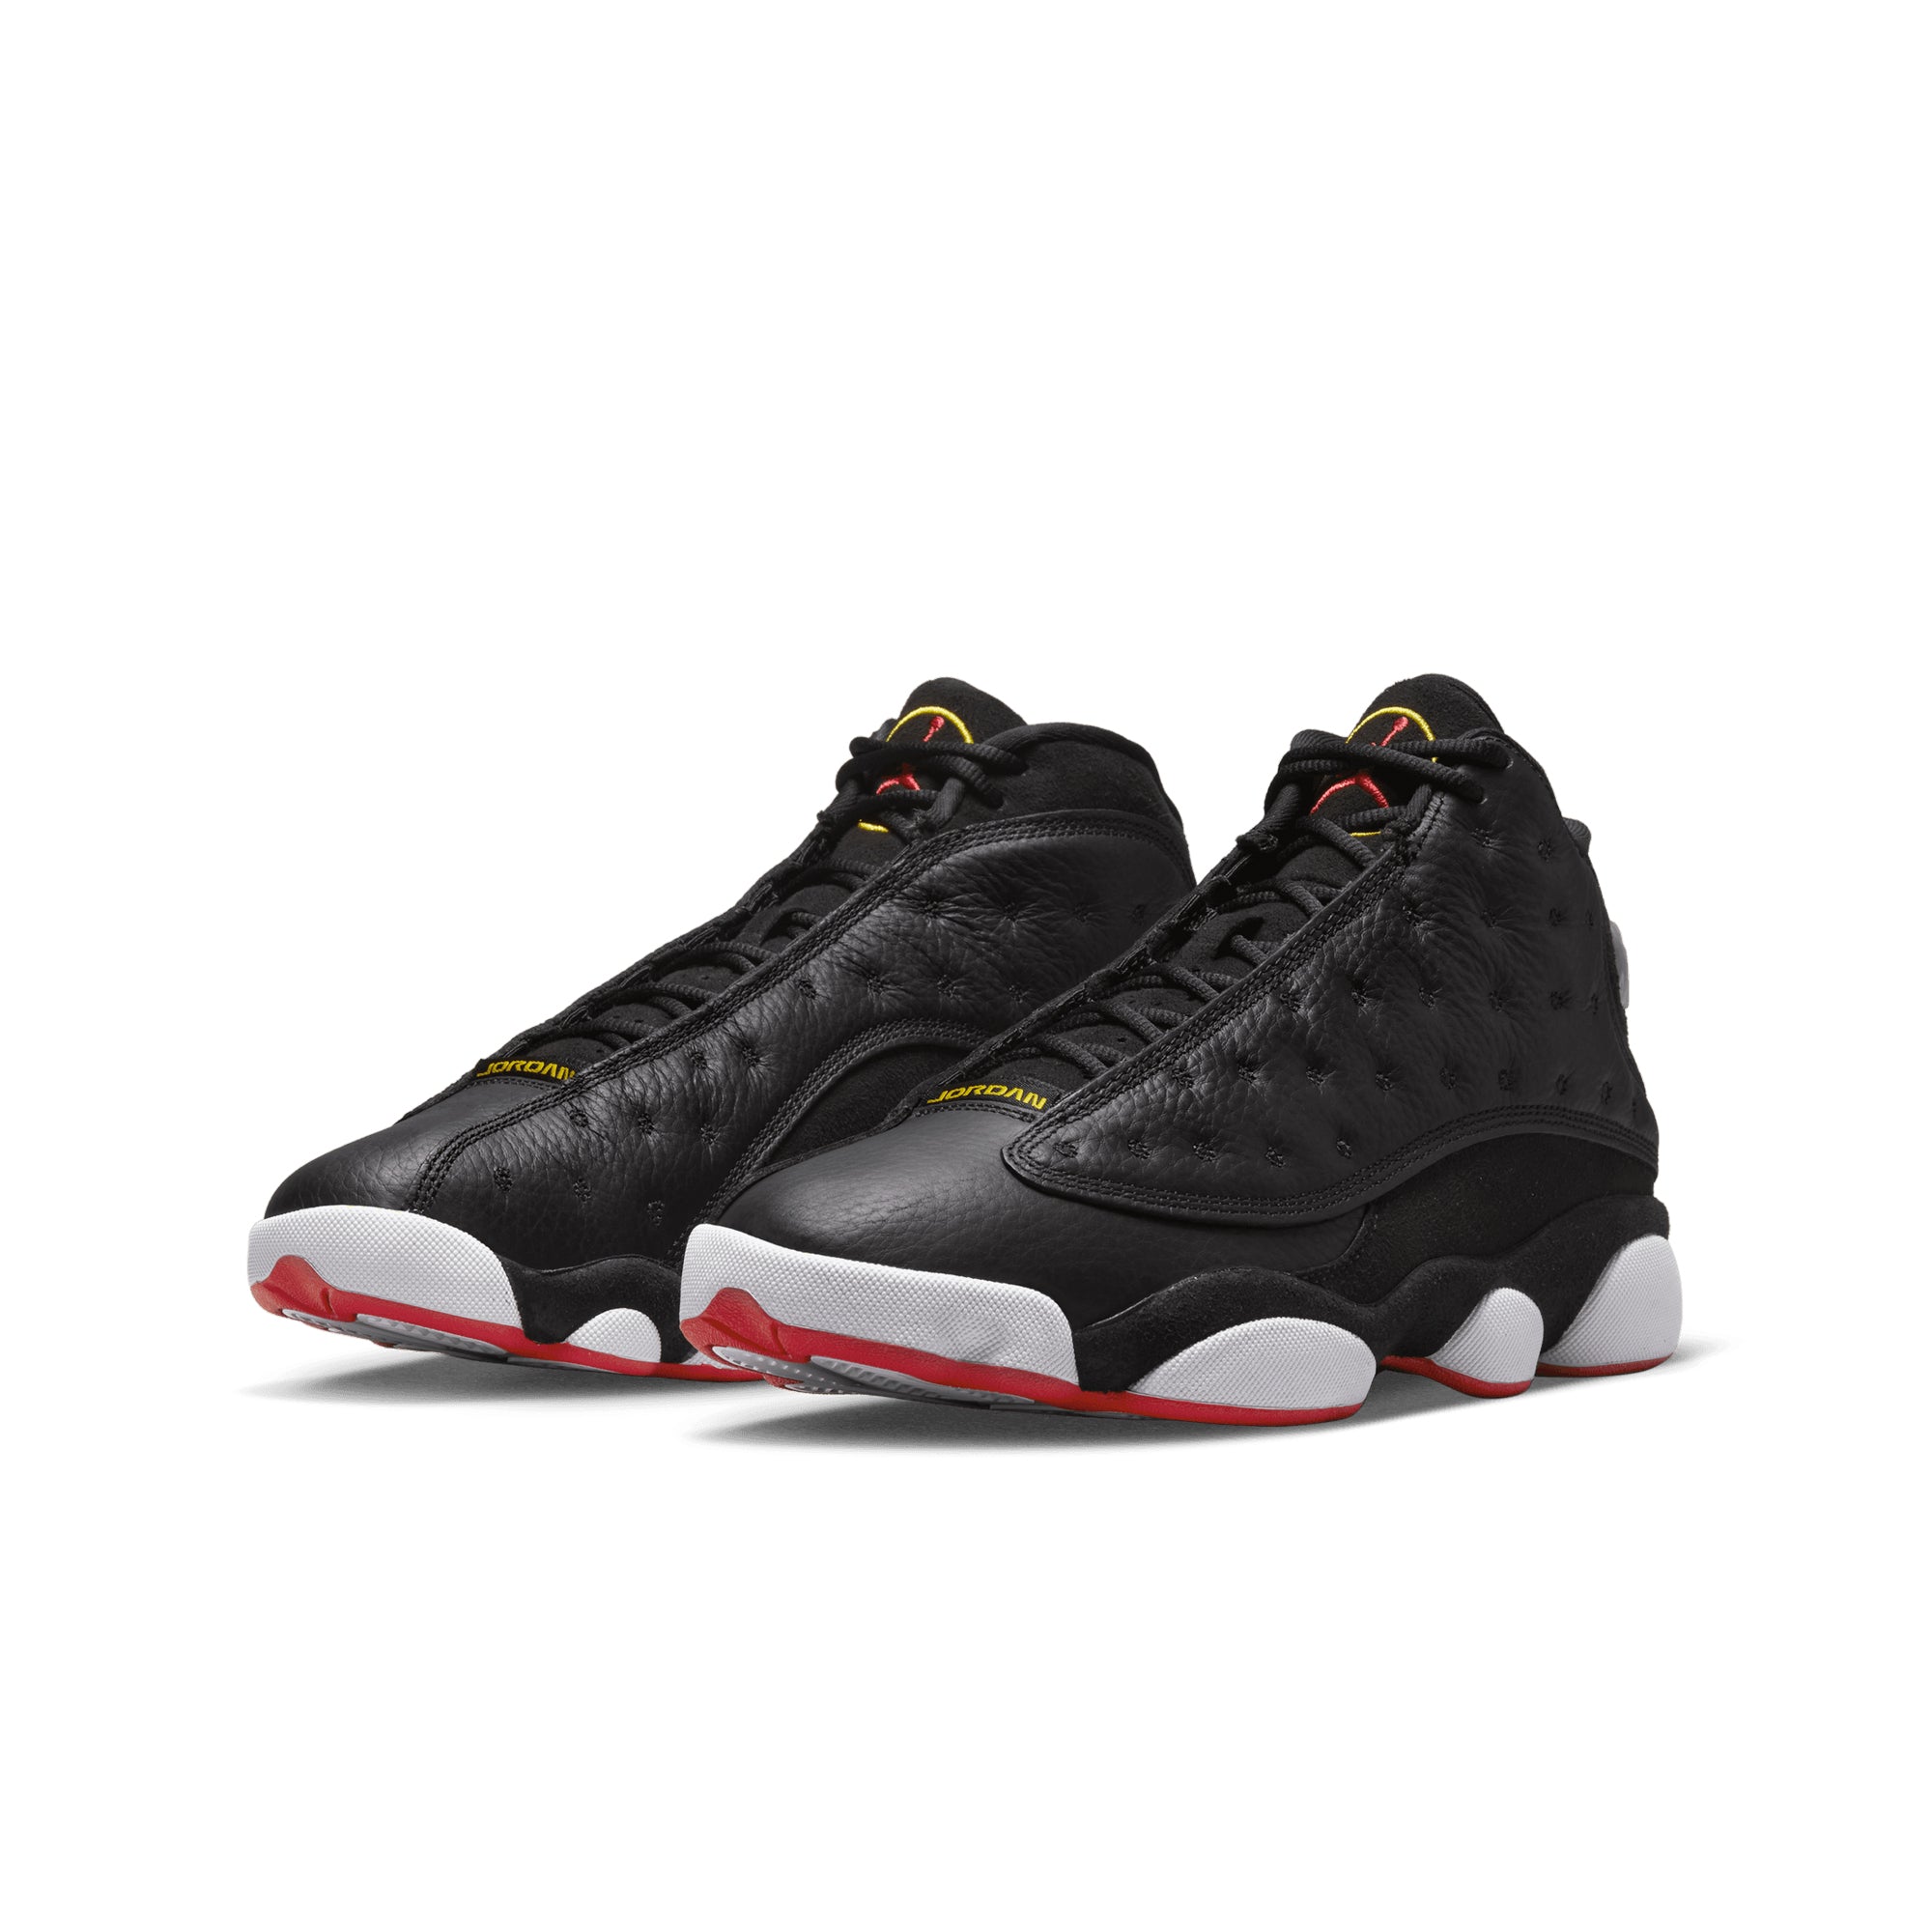 Louis vuitton lv x supreme air jordan 13 sneakers shoes gifts for